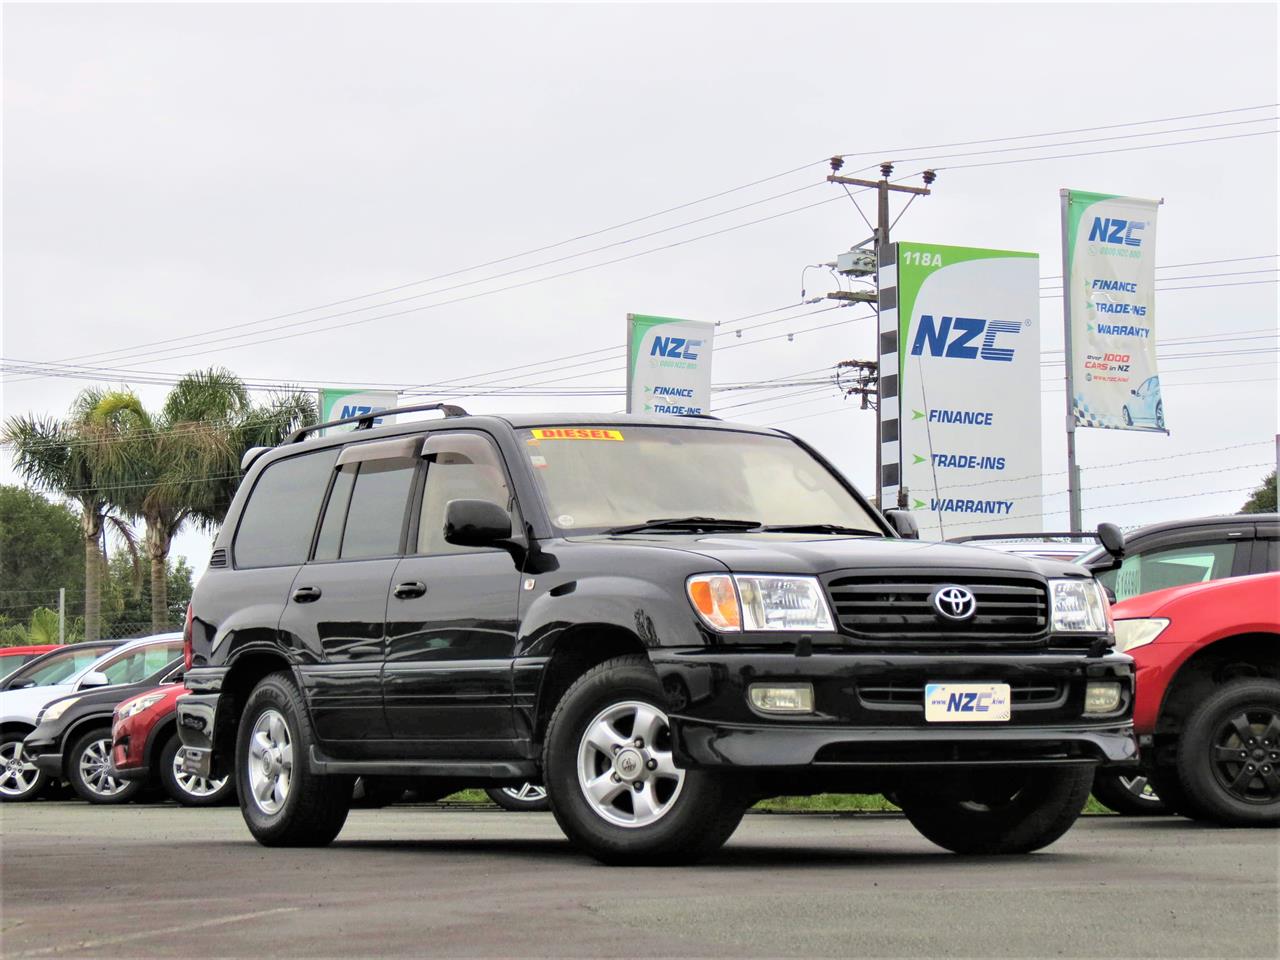 NZC 1998 Toyota LAND CRUISER just arrived to Auckland